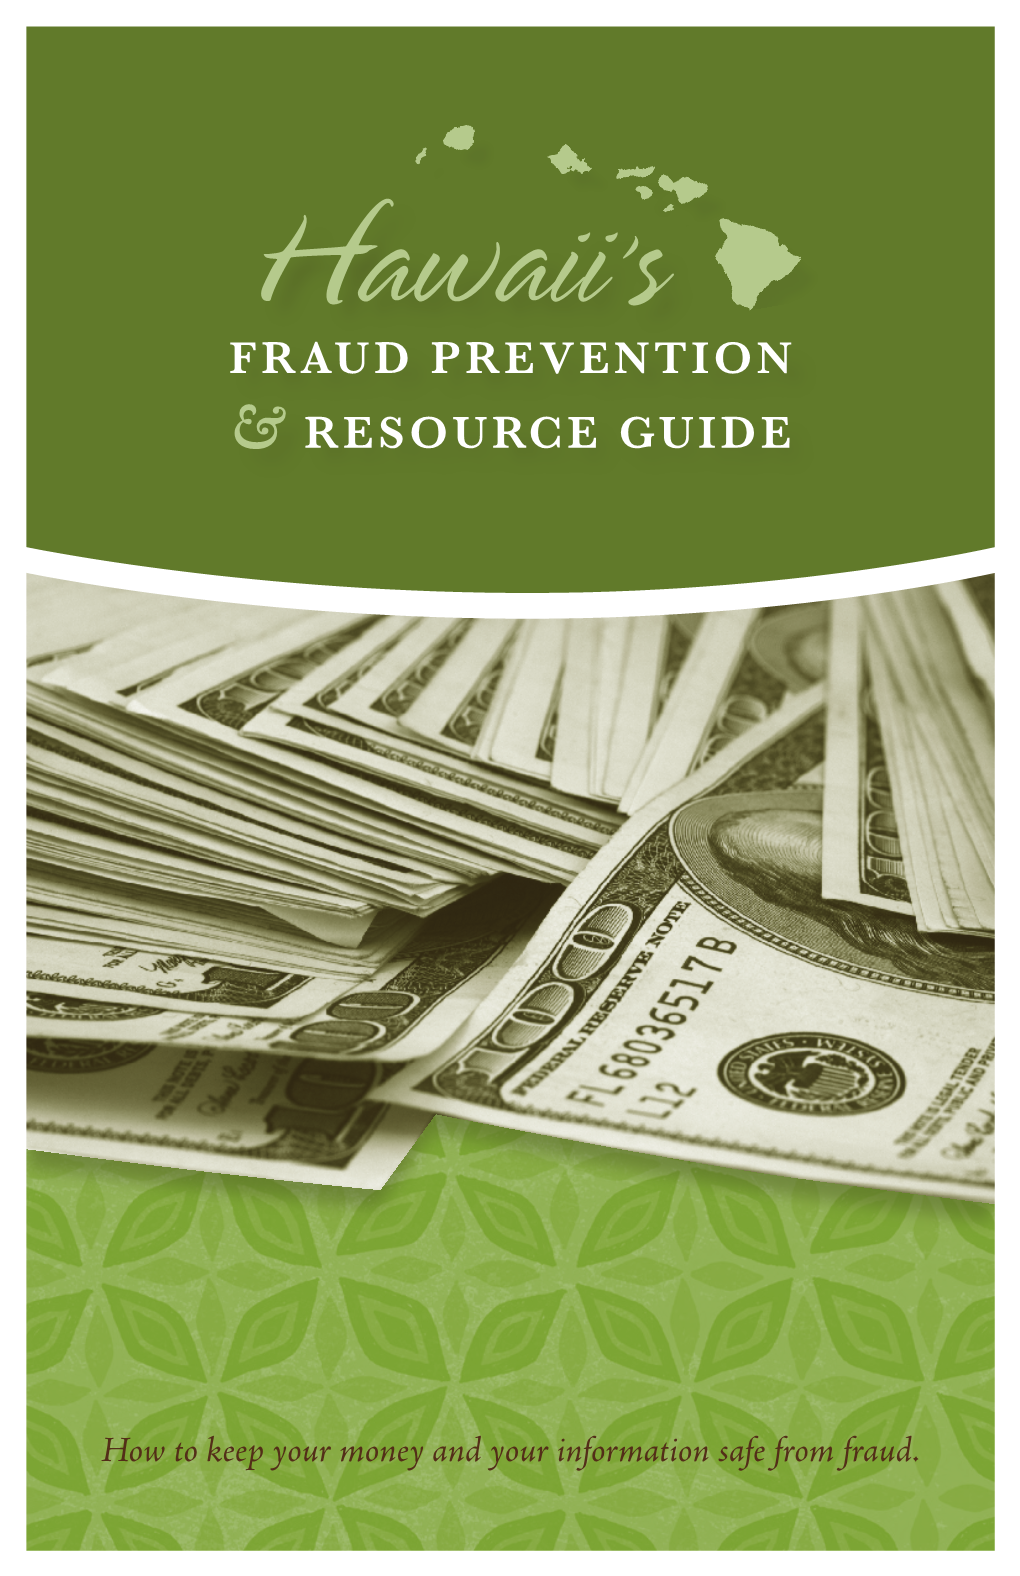 Hawaii's Fraud Prevention & Resource Guide